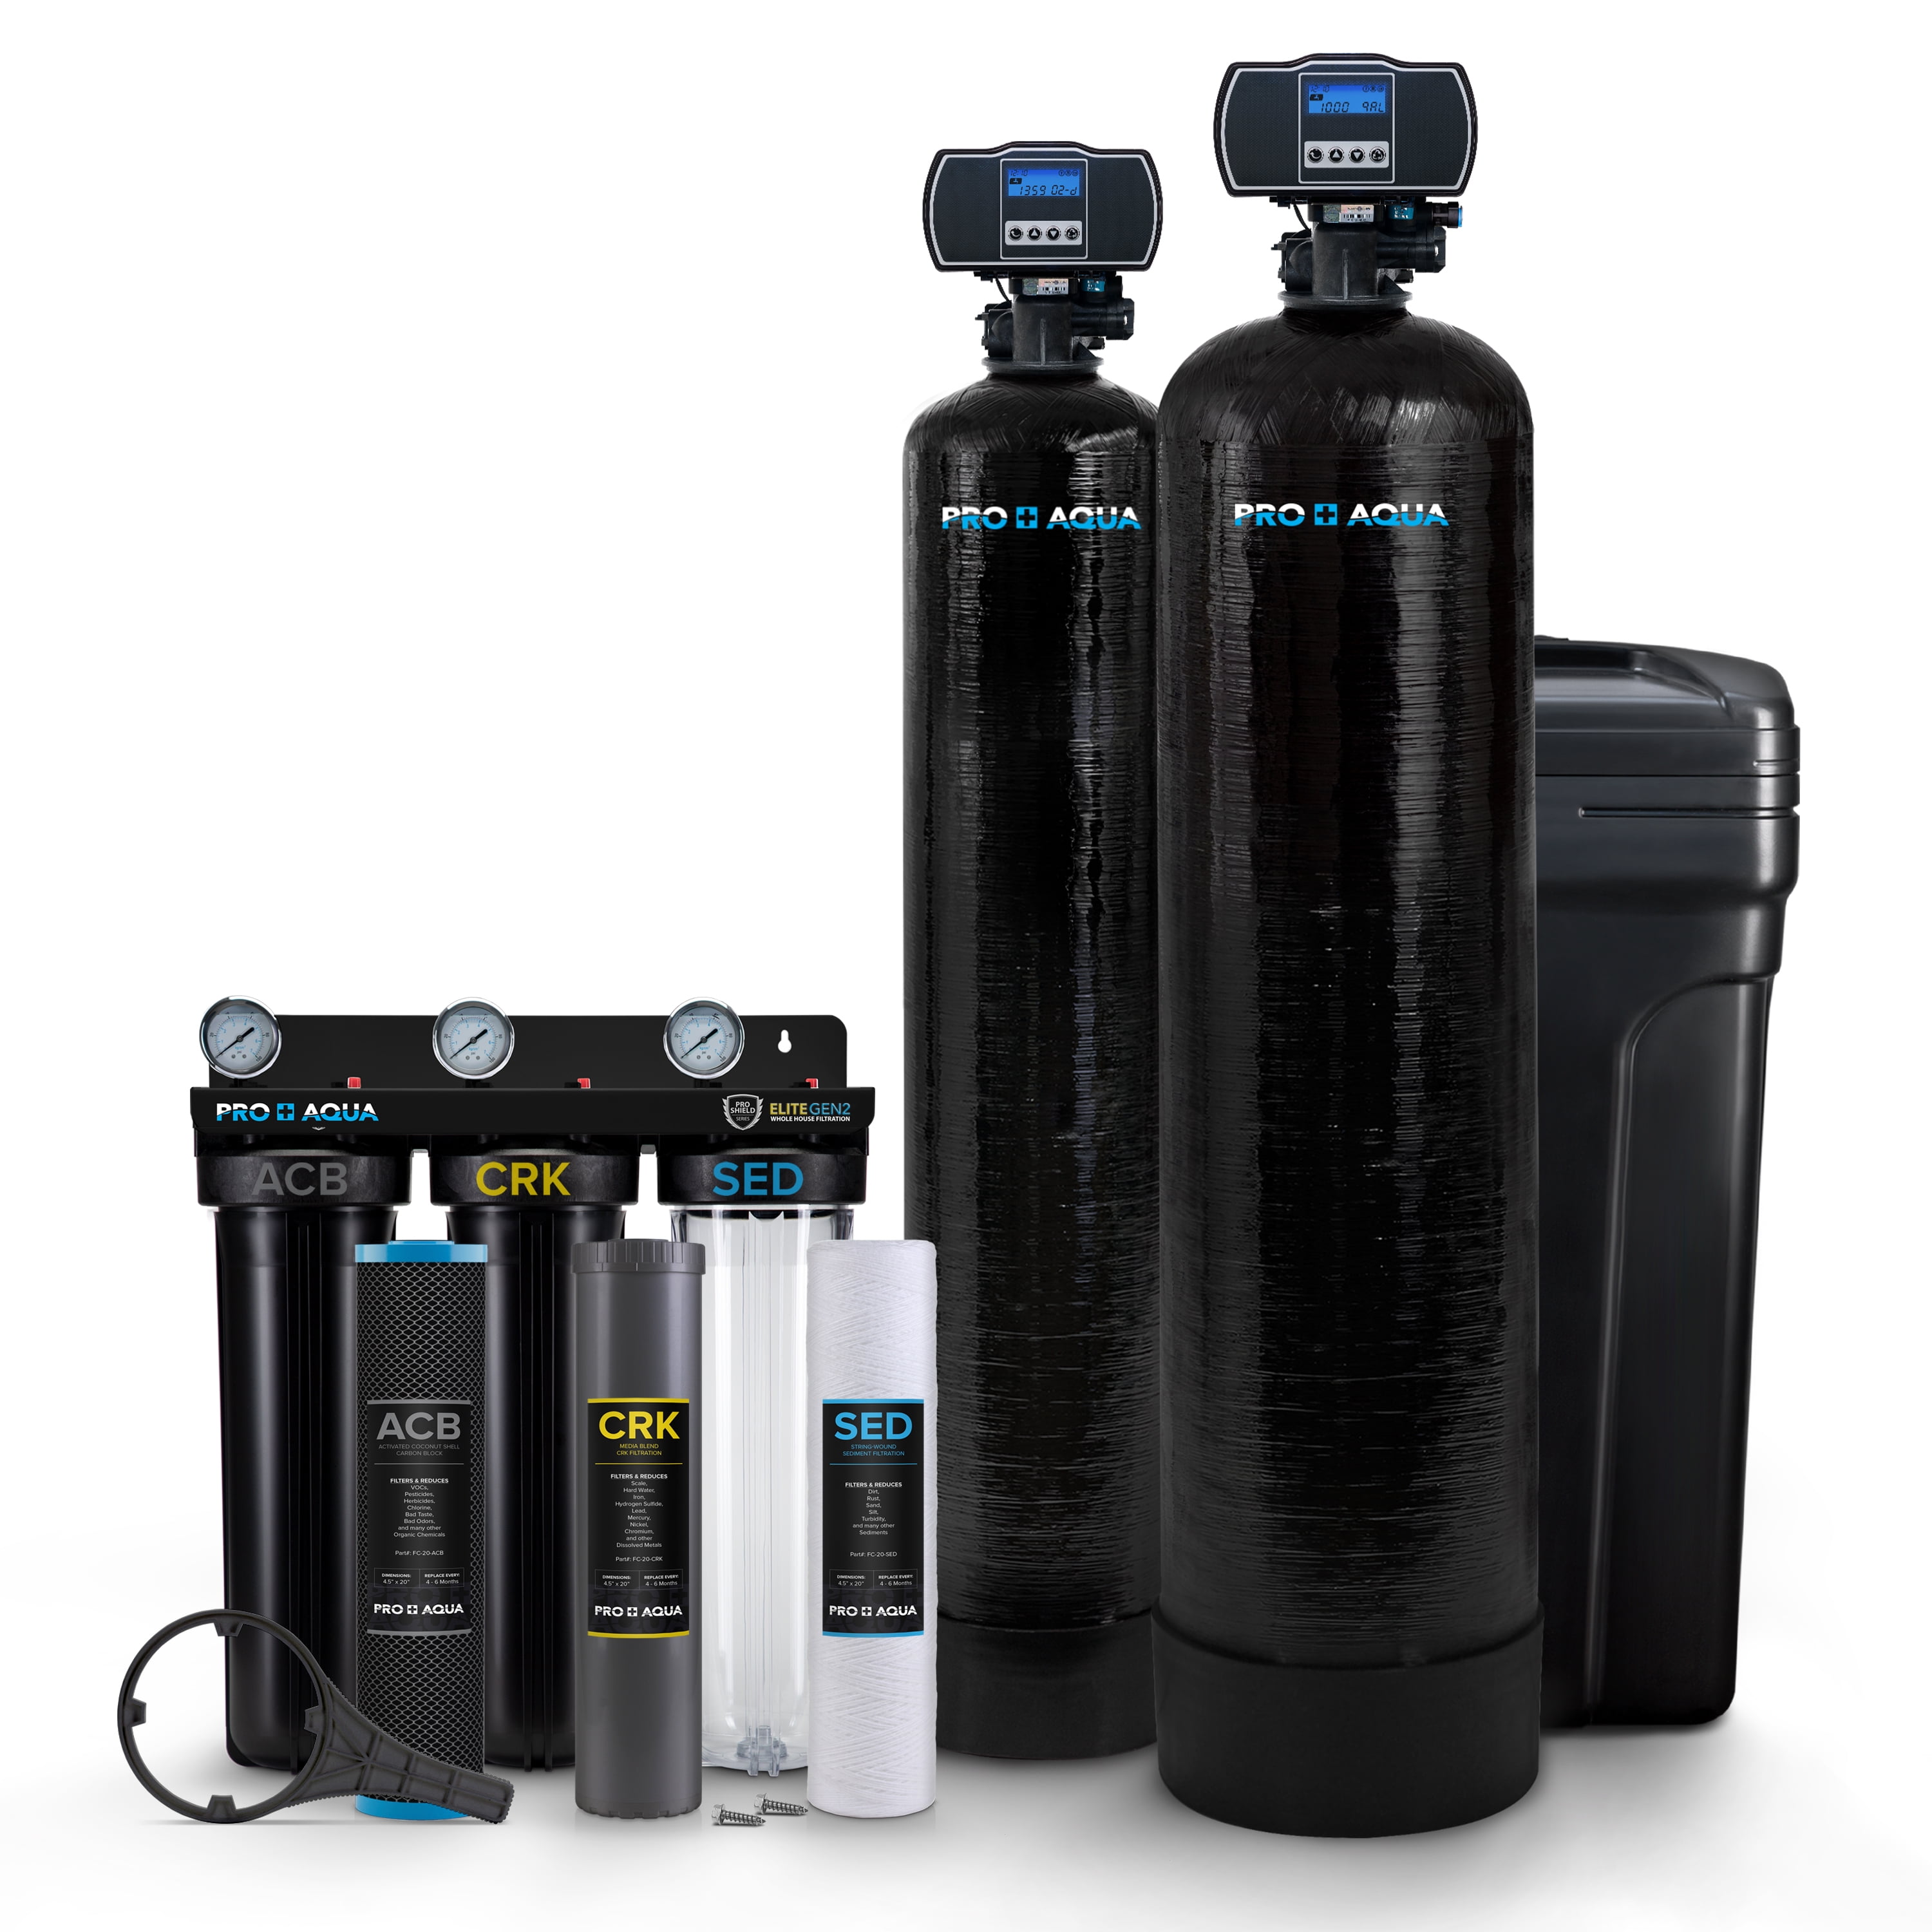  OUT Filter Mate Heavy Duty Water Softener Cleaner System Kit,  Powerfully Removes Lime, Rust and Buildup : Industrial & Scientific